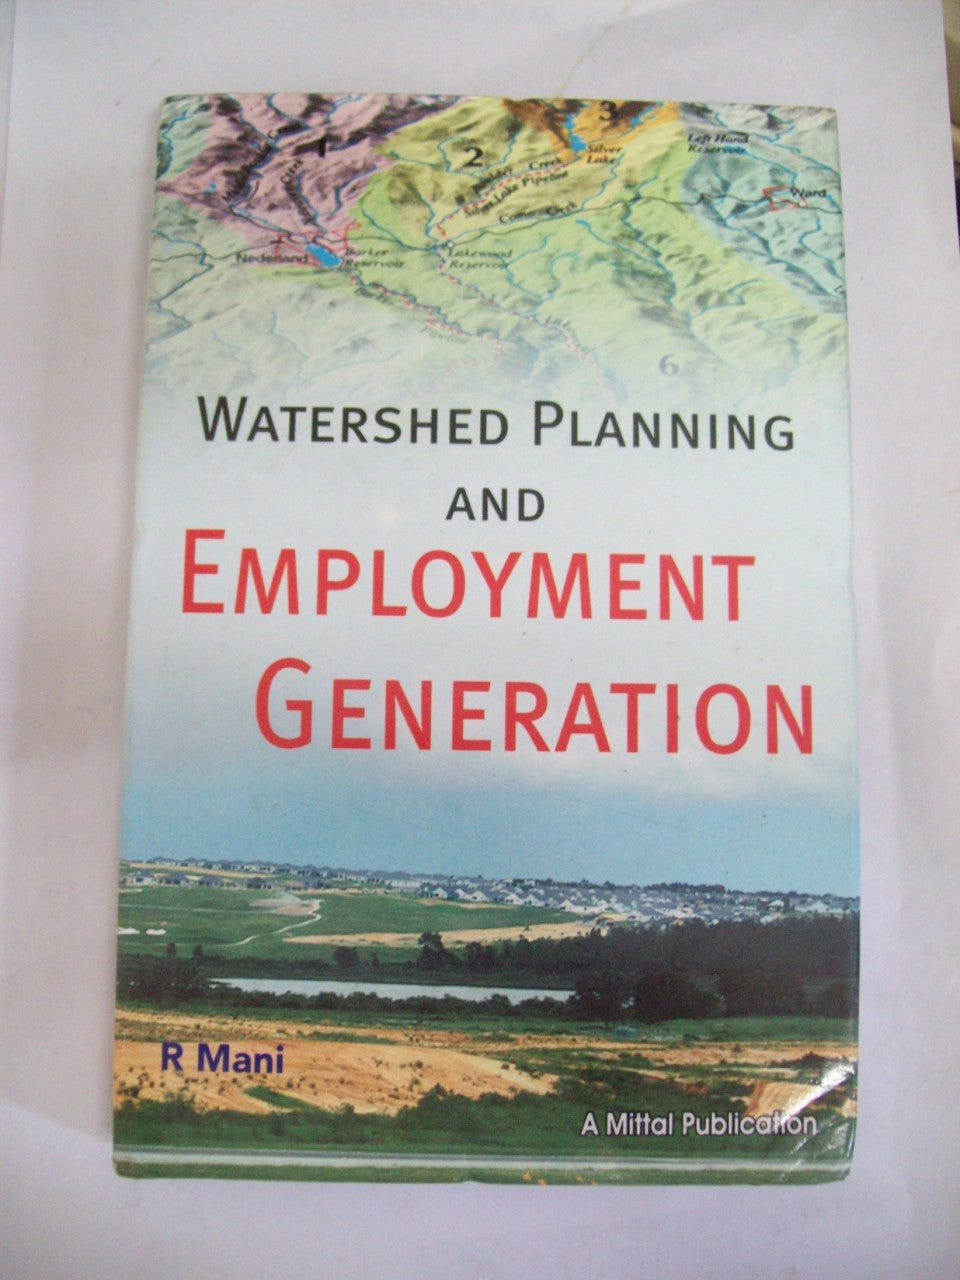 Watershed Planning and Employment Generation